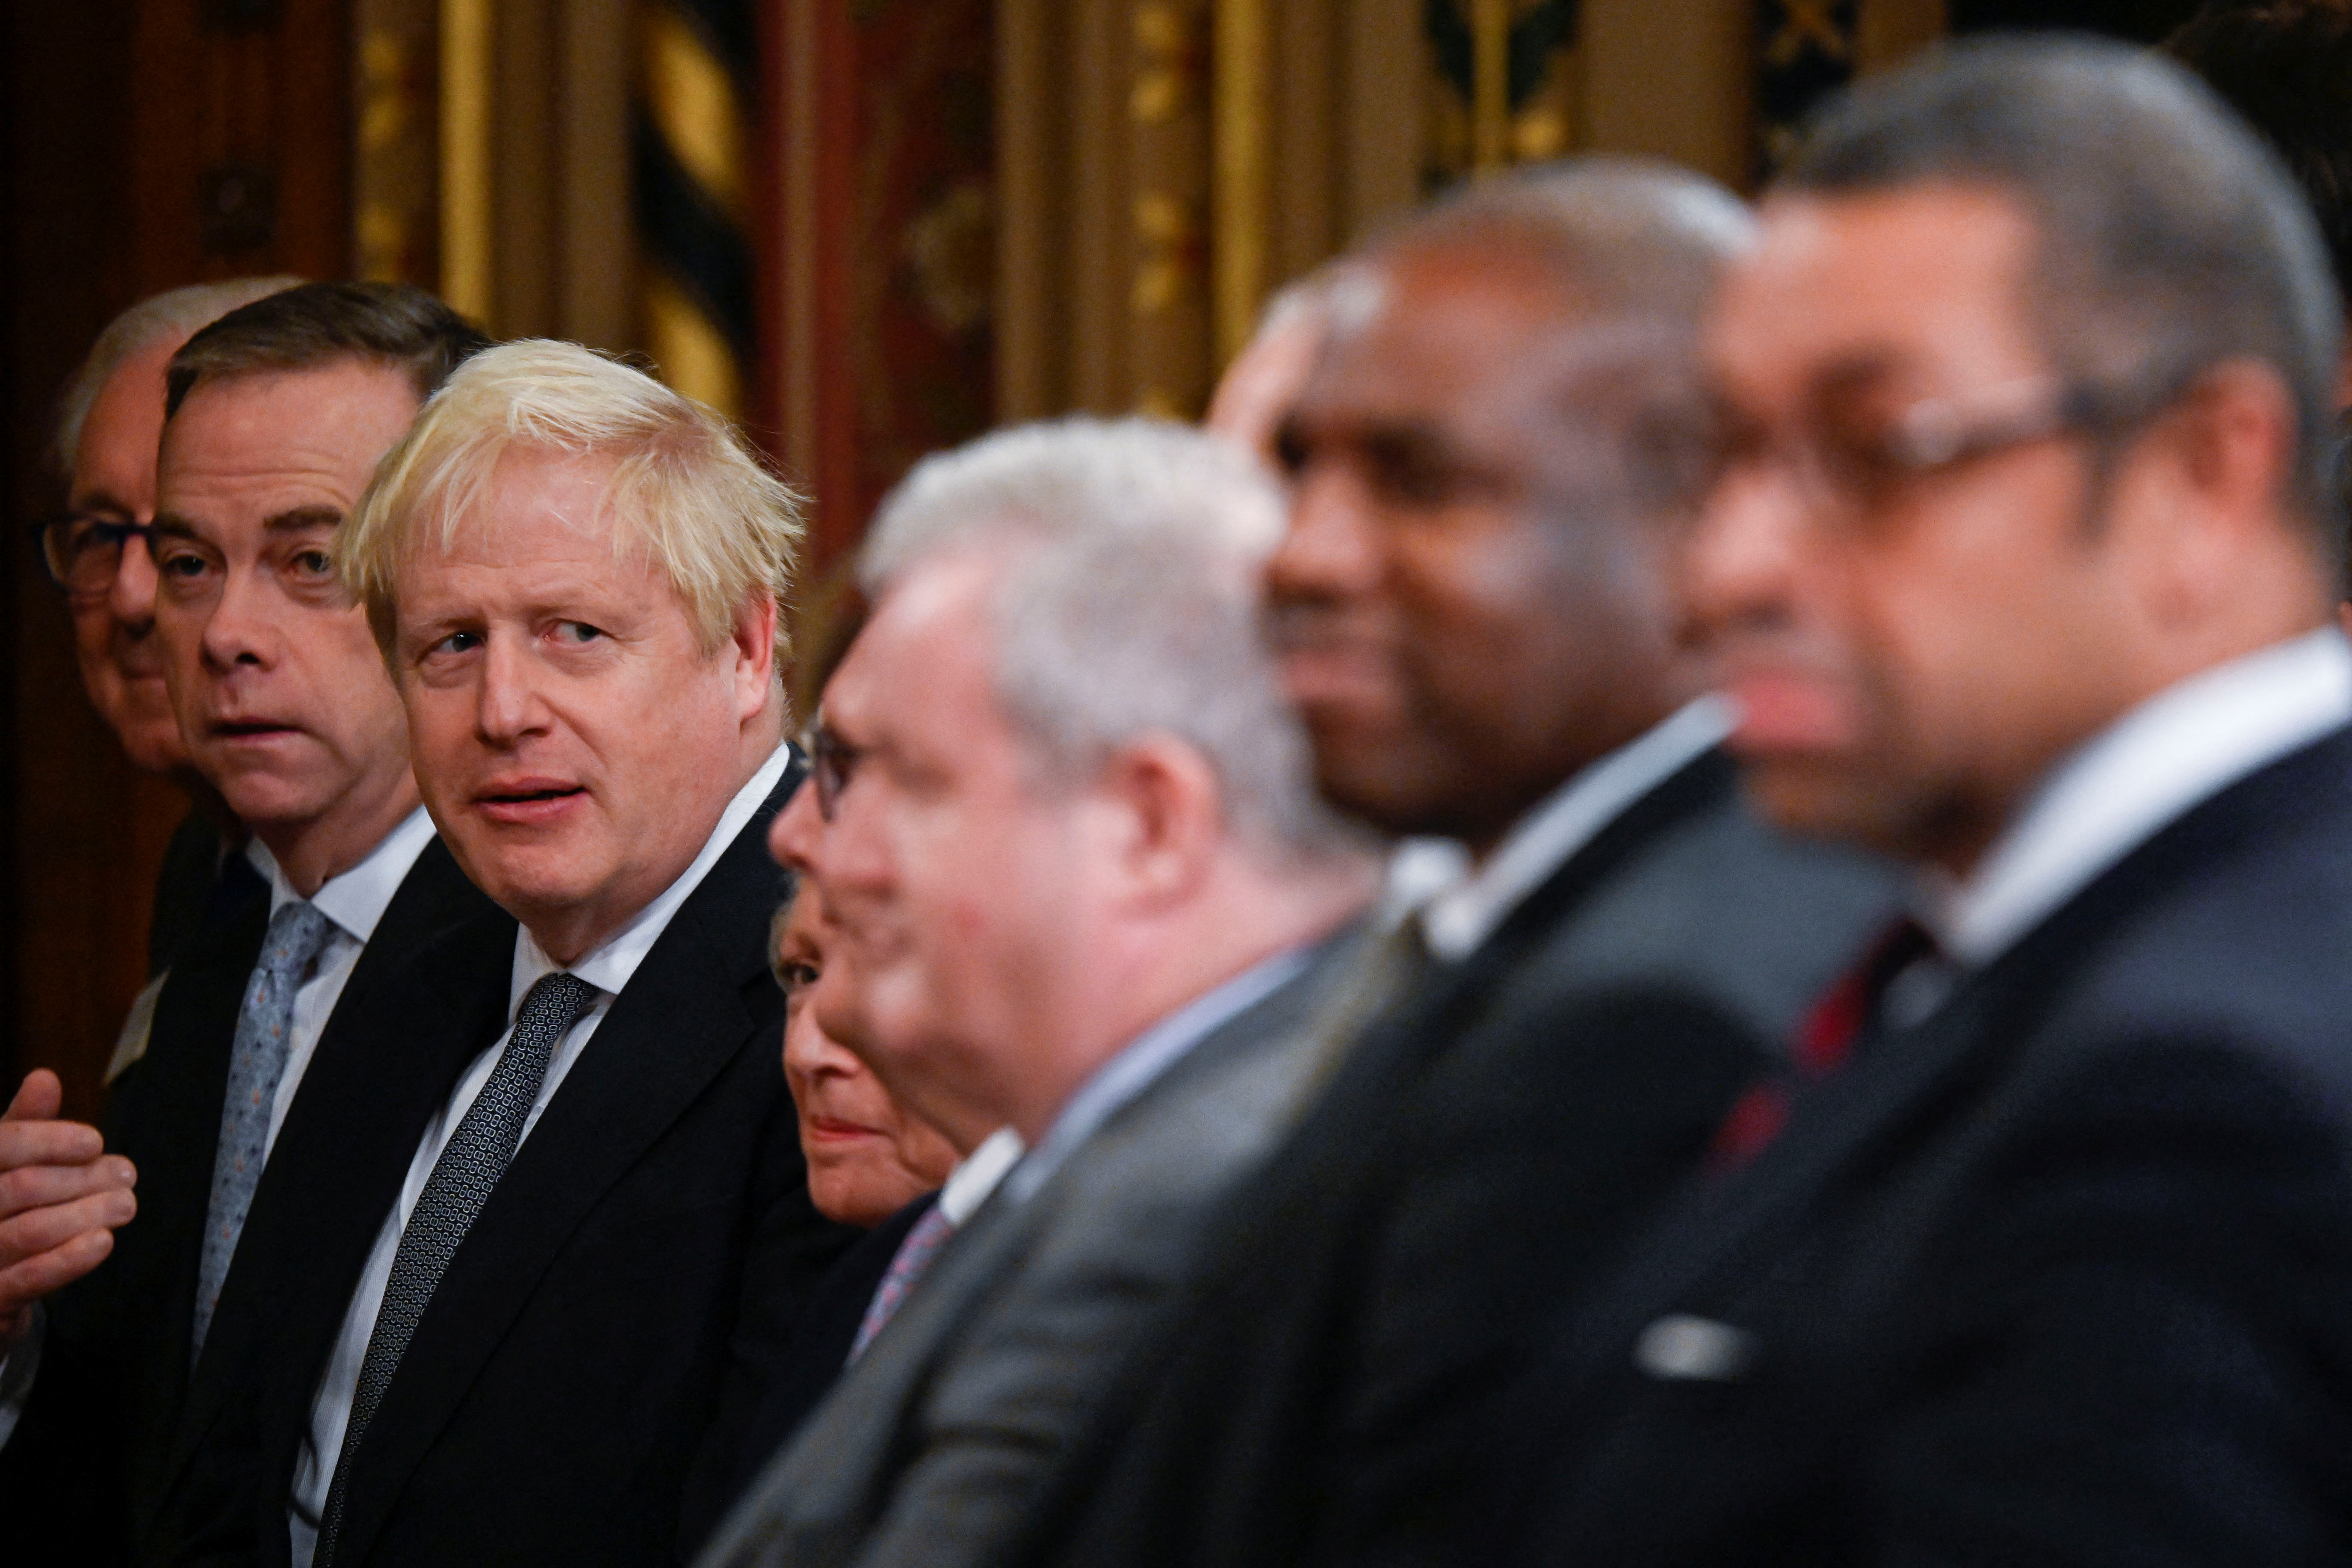 An investigation will be opened by a parliamentary commission that could lead to the suspension or even the expulsion of Johnson from the House of Commons (REUTERS / Toby Melville / Pool)